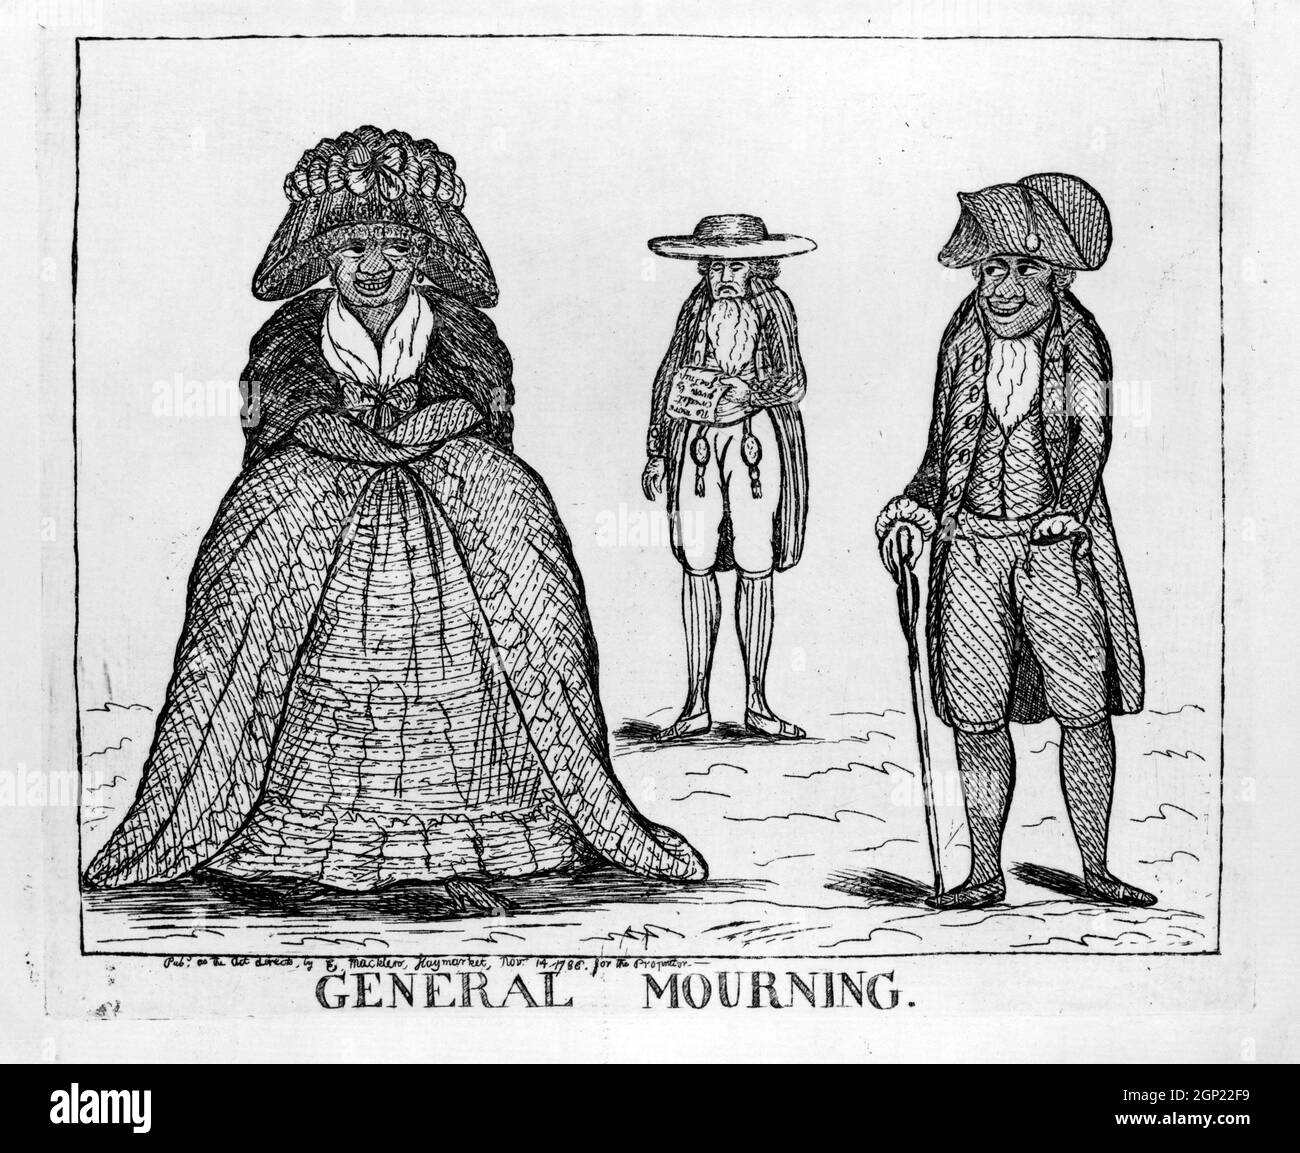 Vintage illustration printed November 14th 1786 entitled 'General Mourning' showing a happy well dressed Afro Caribbean man and woman while their former master and slave owner stands in the background looking unhappy with piece of paper on which is written 'No more credit given by' Stock Photo